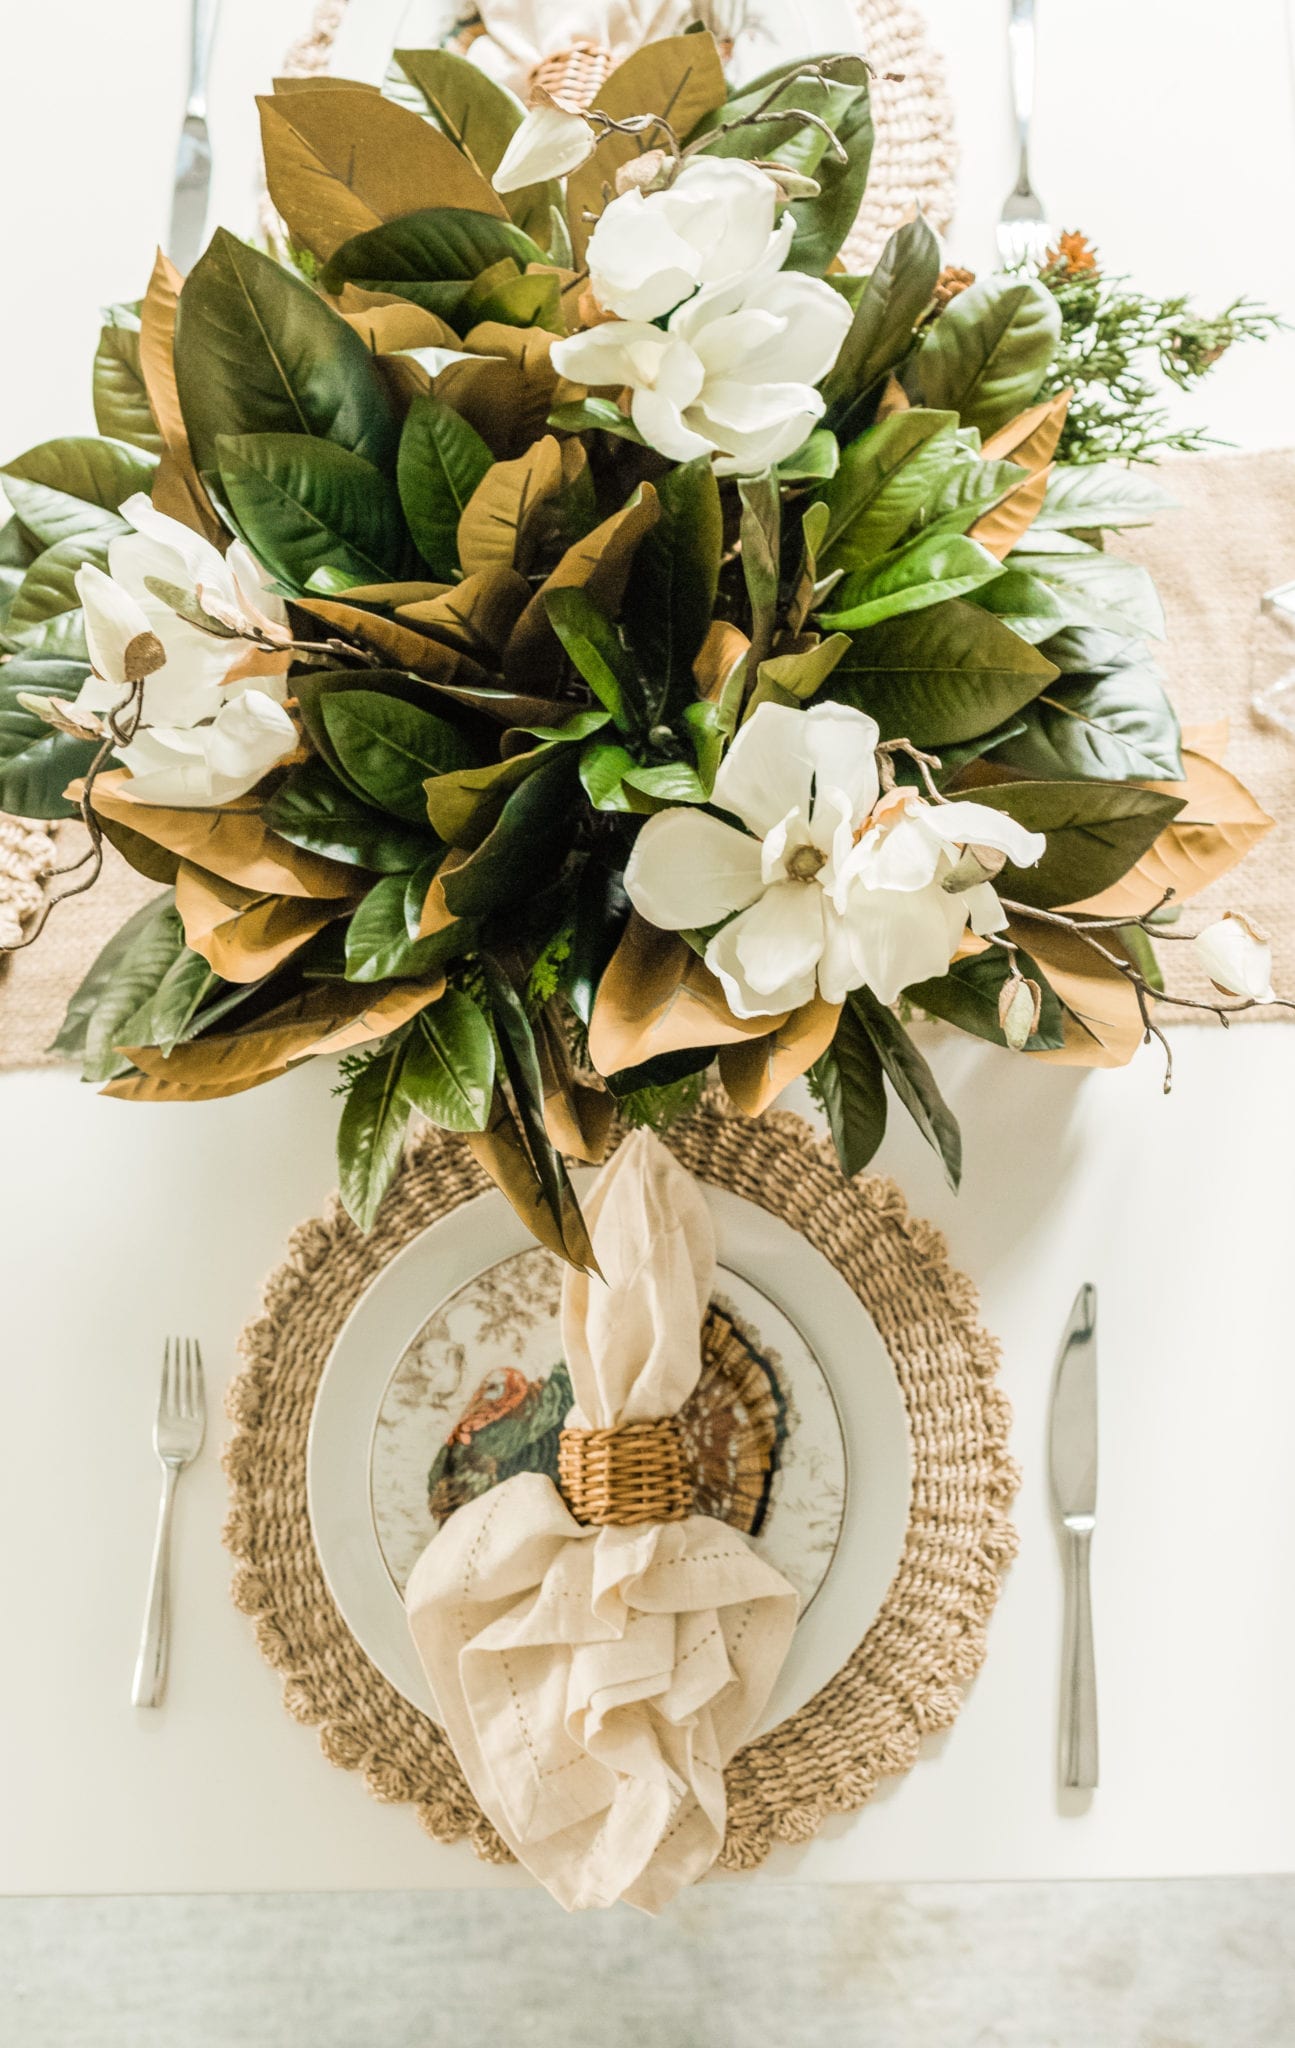 Afloral Magnolia Flowers mixed with Afloral silk magnolia leaves for a DIY silk flower fall arrangement.